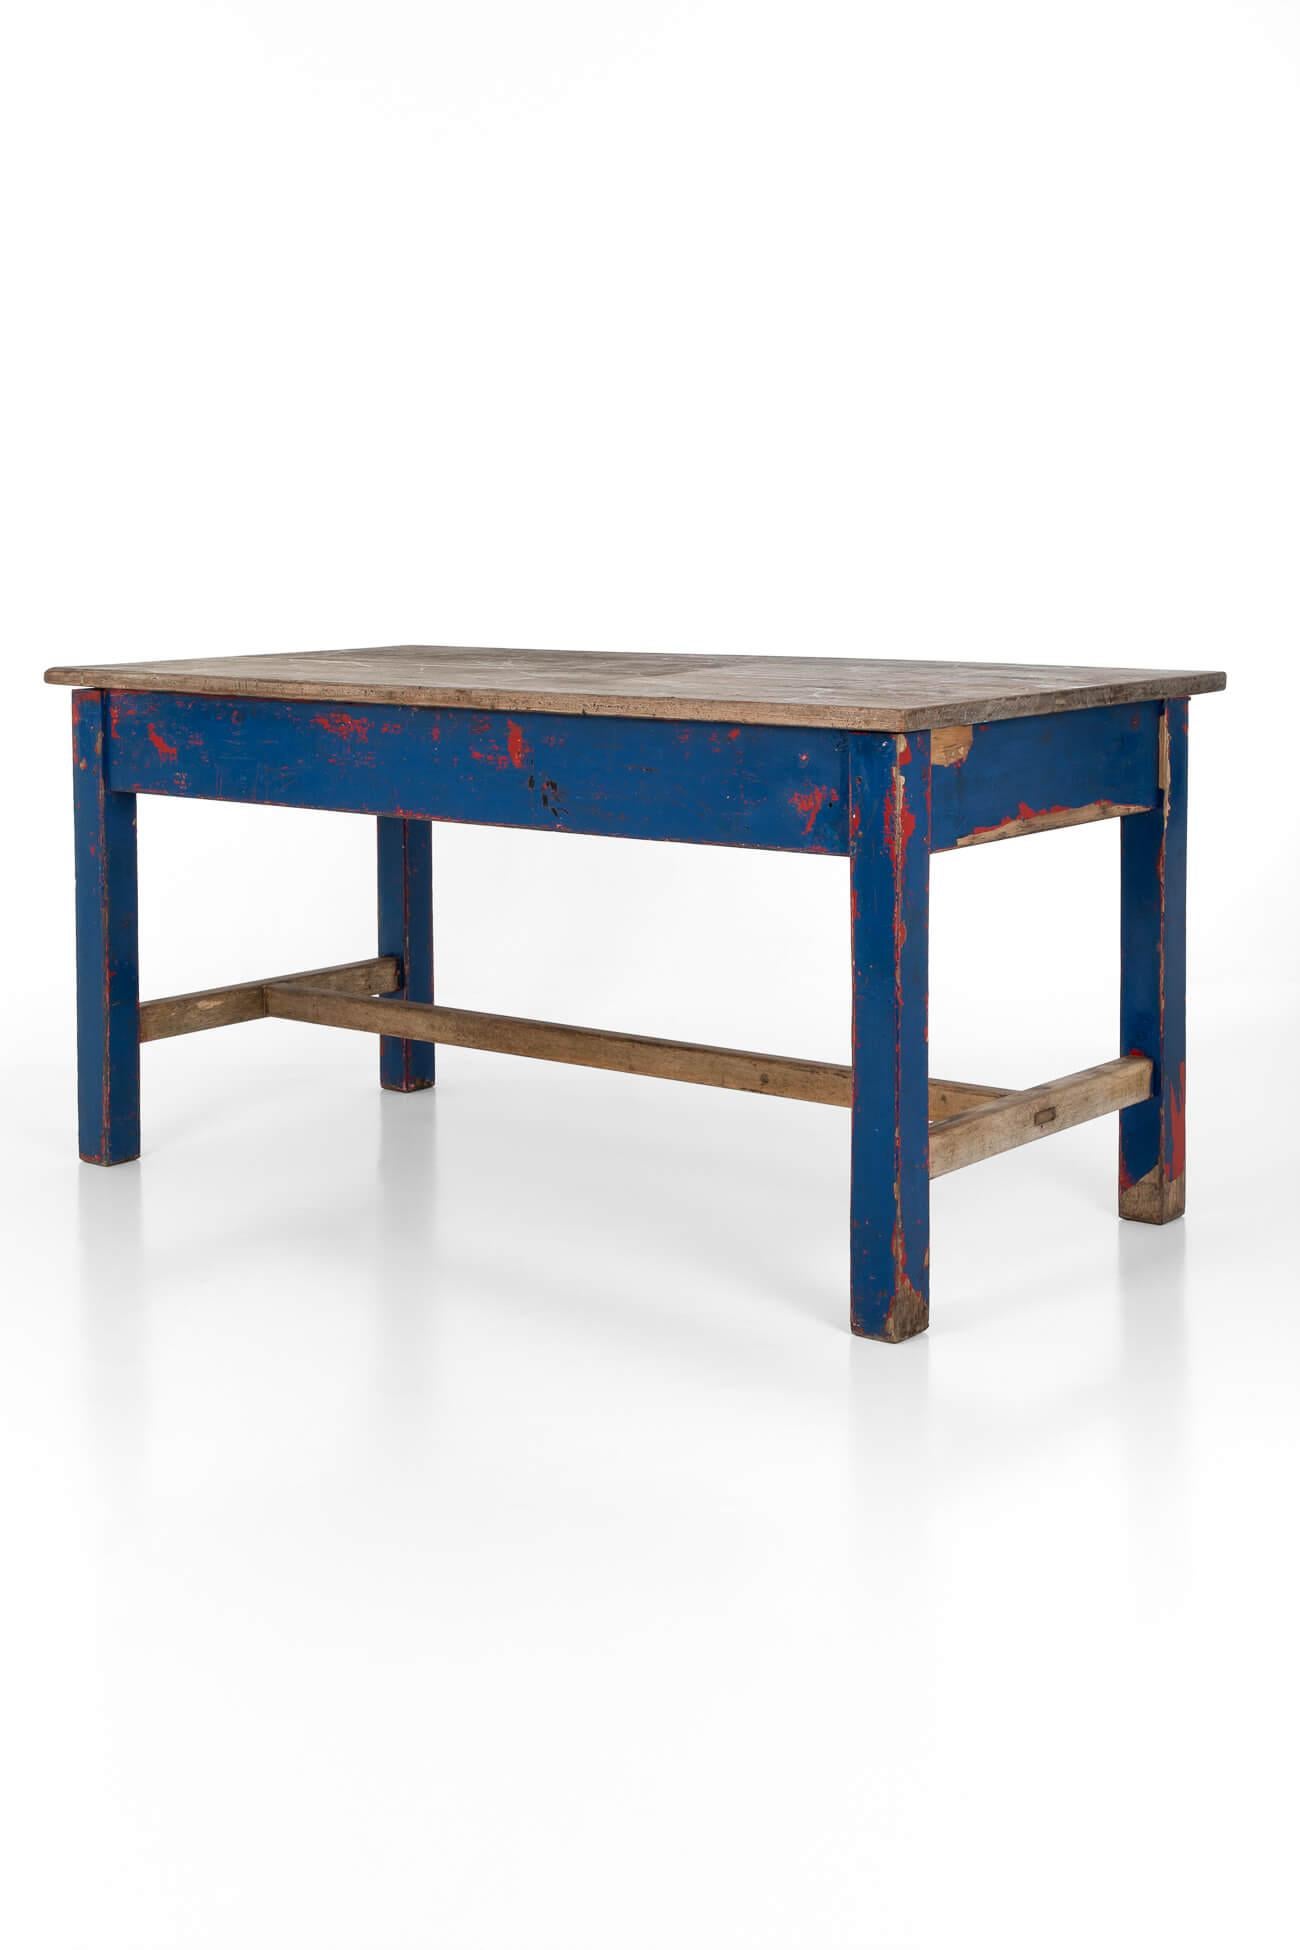 A wonderful art school table in oak.

The heavy oak table top has been bleached by the sun, giving it a naturally weathered look.

With four block legs united by an H-stretcher and a peripheral apron to all sides.

The base retains layers of its